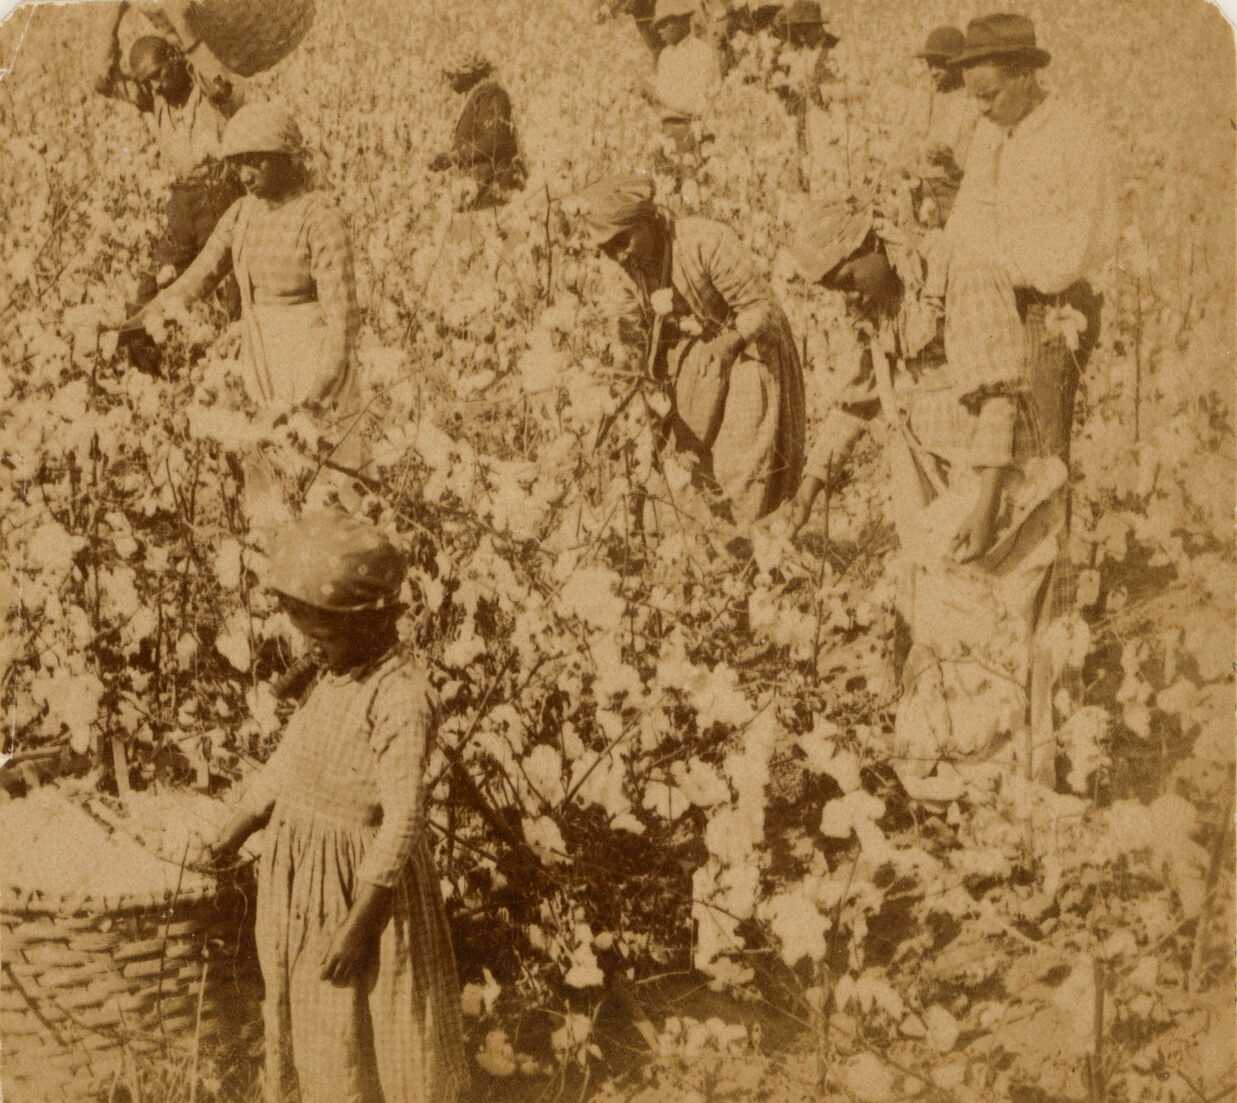 An albumen print mounted on board depicting formerly enslaved men, women and children picking cotton on a South Carolina plantation. The laborers are spread out in the field, many bending down to pick the cotton. The women wear checked dresses and cloth headwraps. The men wear light colored shirts and dark brimmed hats. Many wear large sacks strapped across their bodies. In the upper left corner, a man raises a large basket behind his head with both hands. In the left foreground, a small girl in a checked dress and patterned head kerchief stands next to a large basket full of cotton. A stamp on the verso reads: [GEO L. COOK, Photographer - 265 KING ST. CHARLESTON, S.C.].